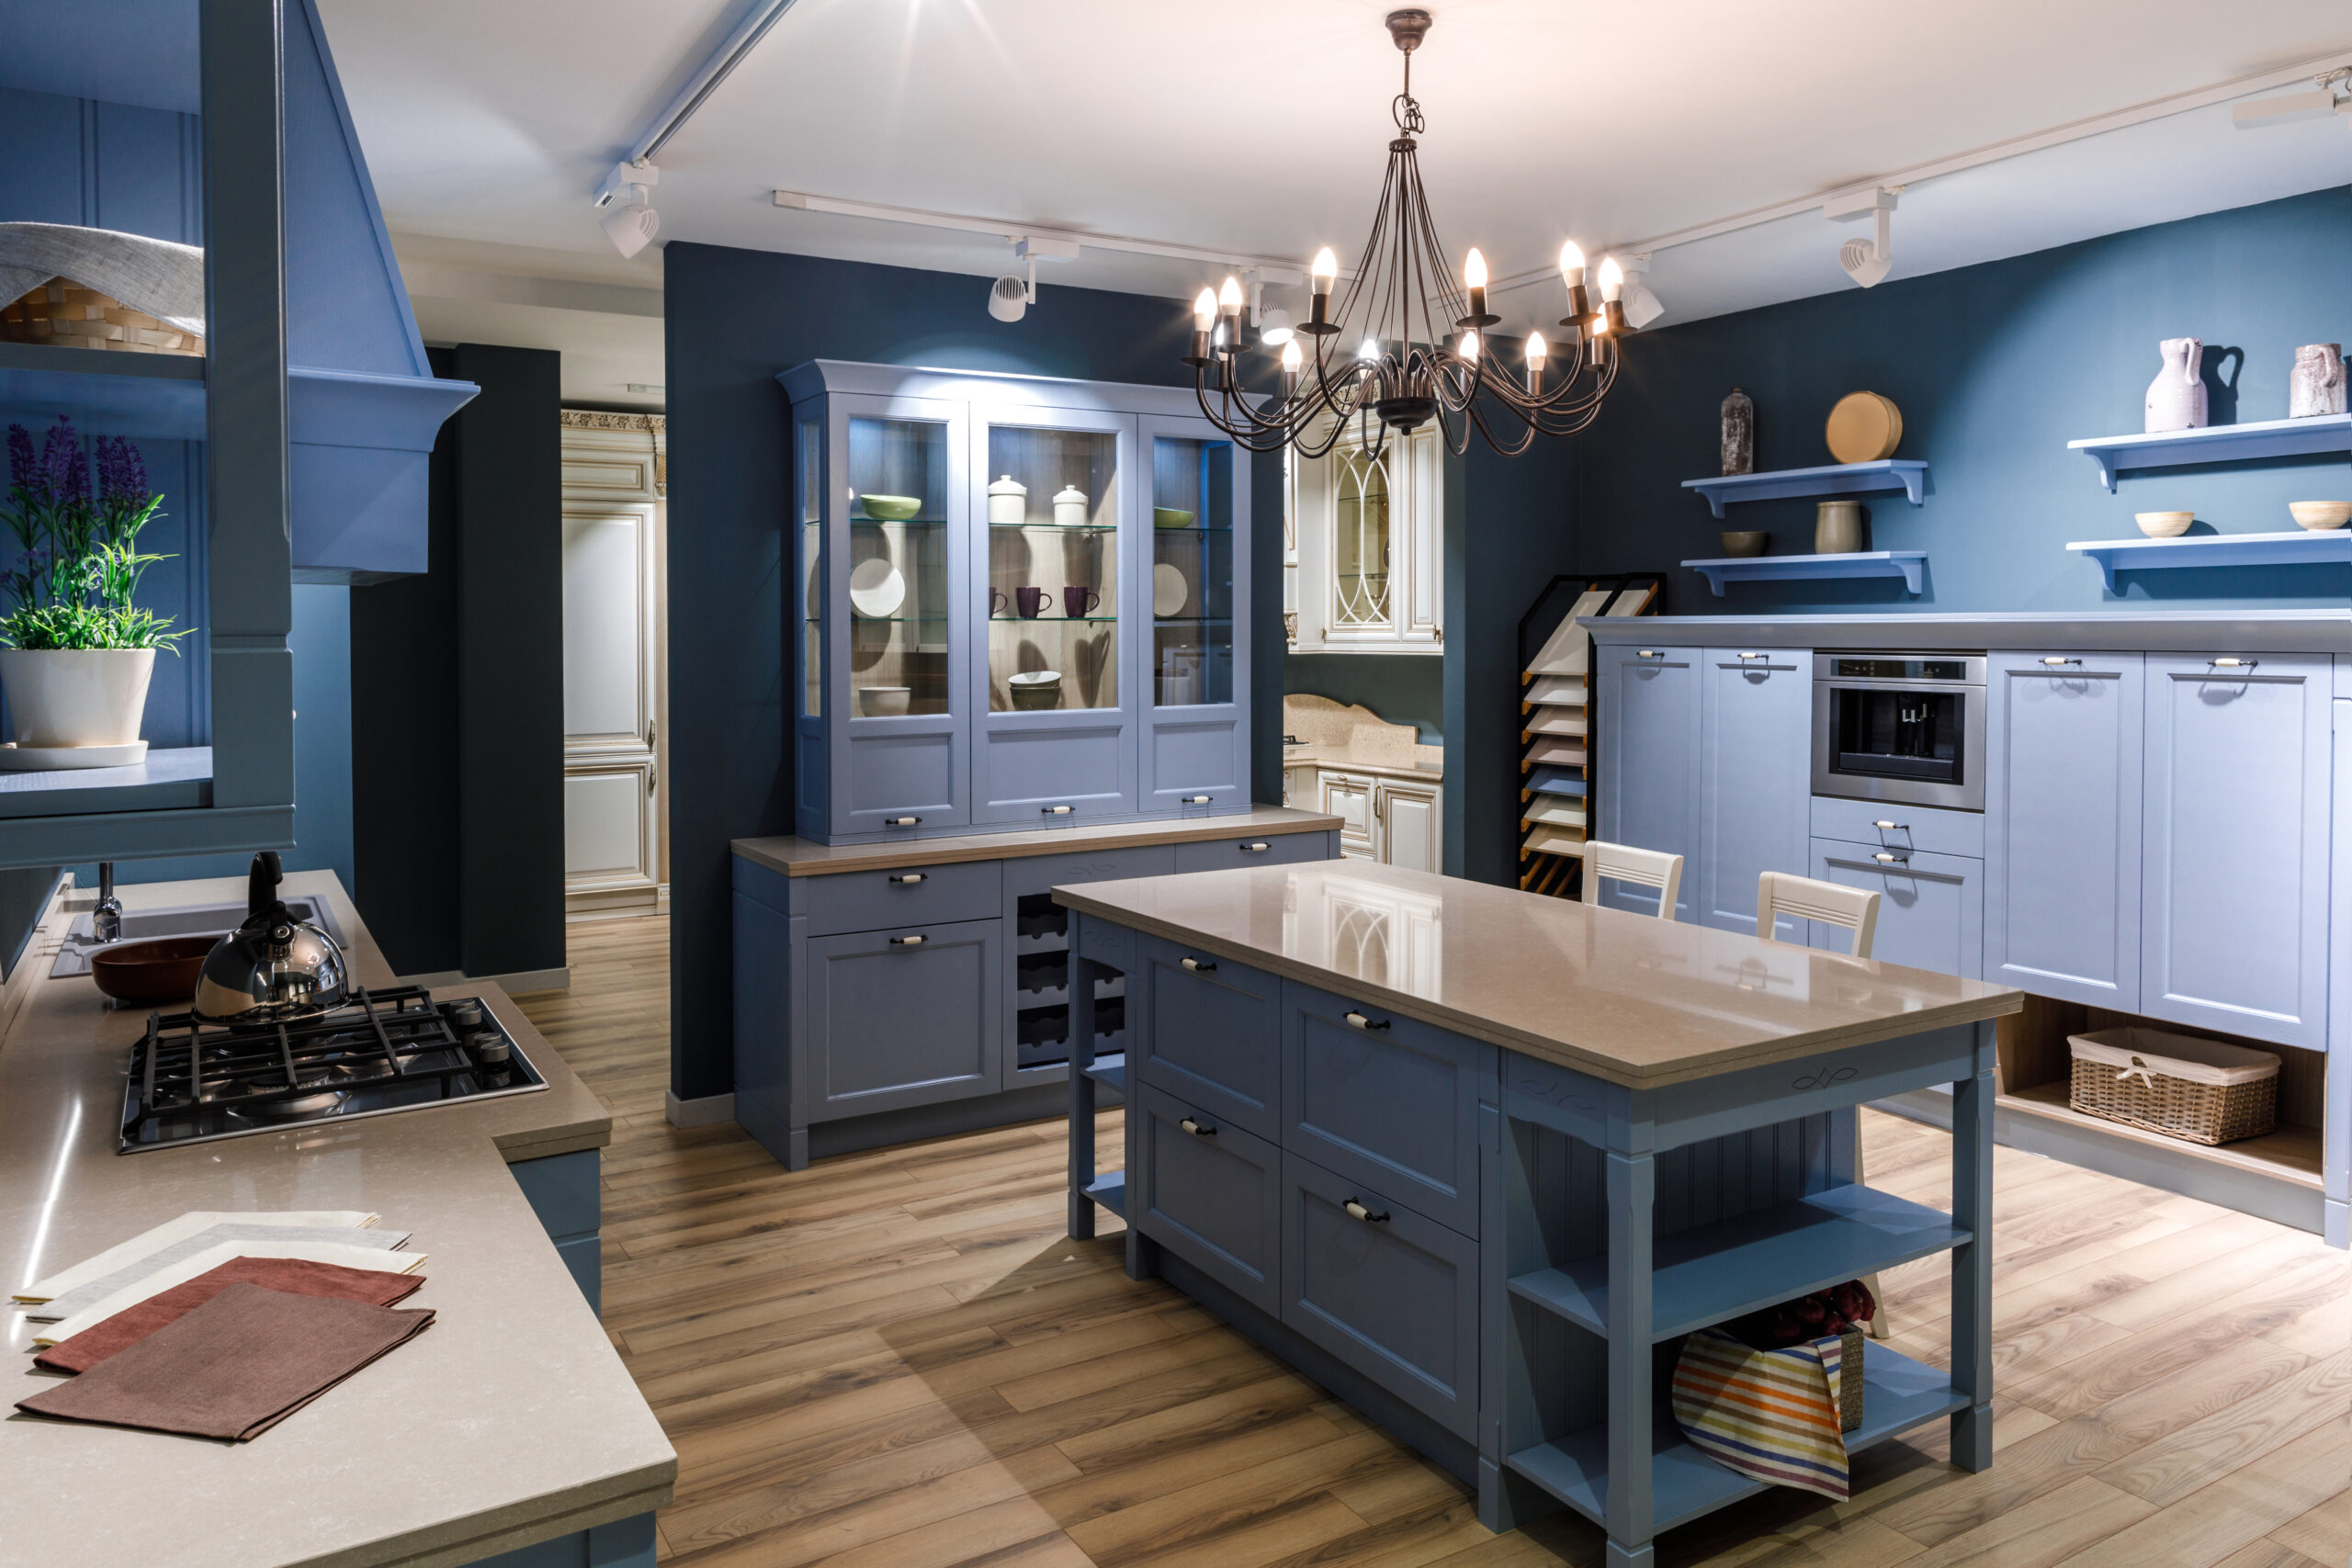 Renovated kitchen in blue